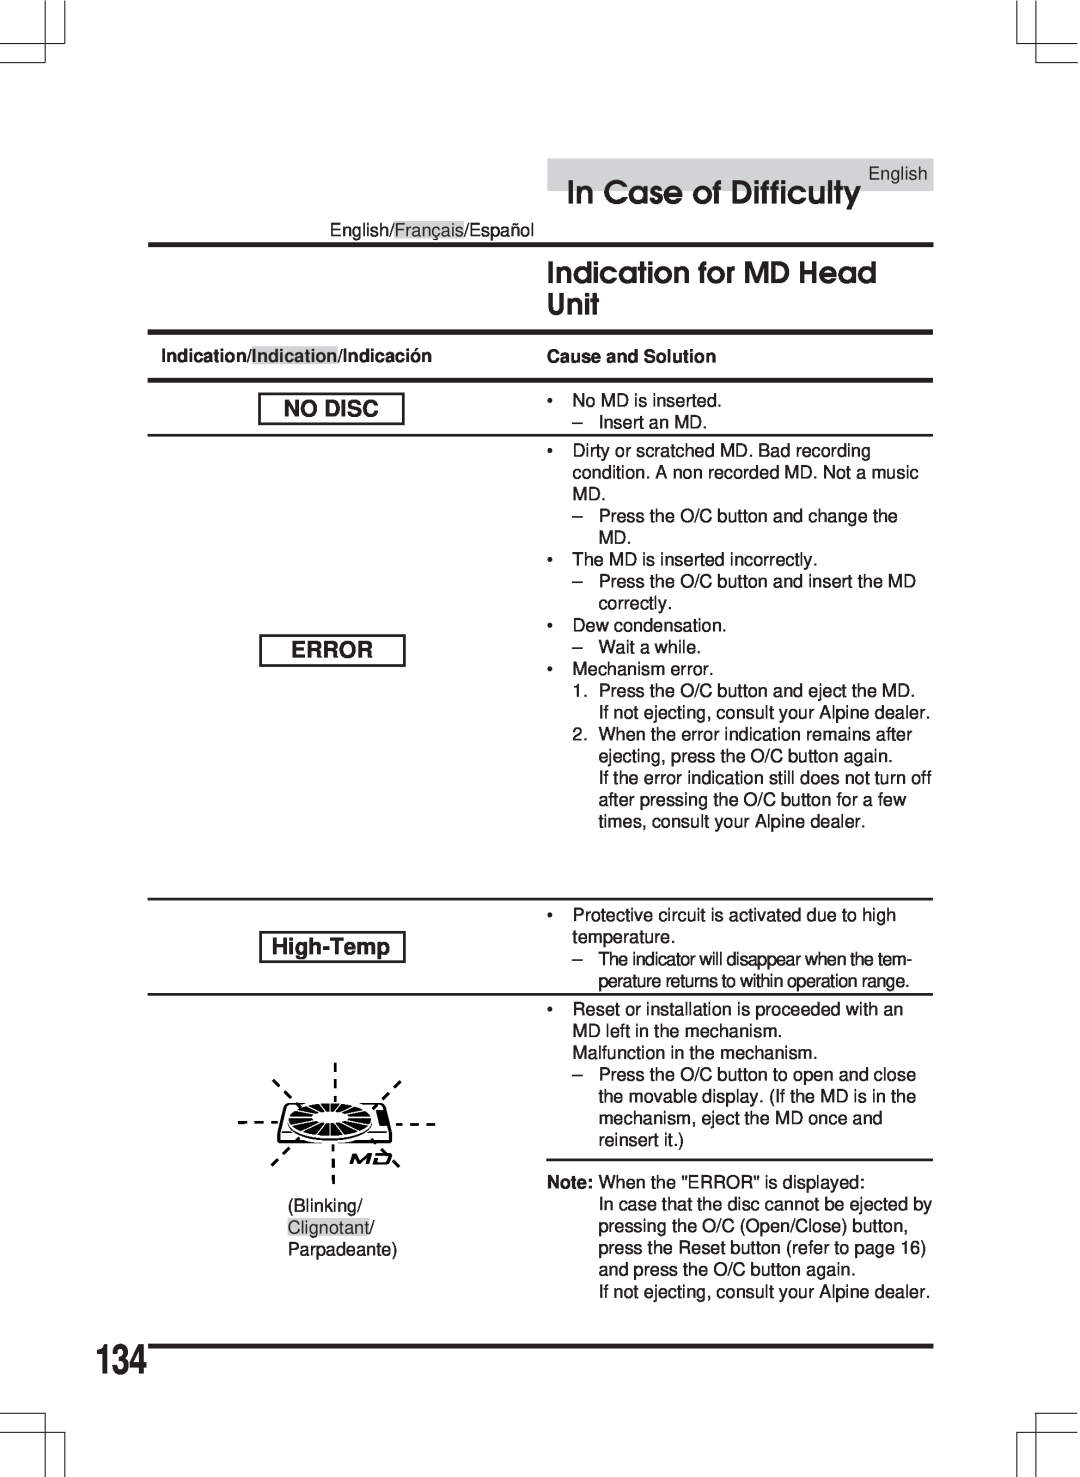 Alpine MDA-W890 owner manual Indication for MD Head Unit, In Case of Difficulty, No Disc Error, High-Temp 